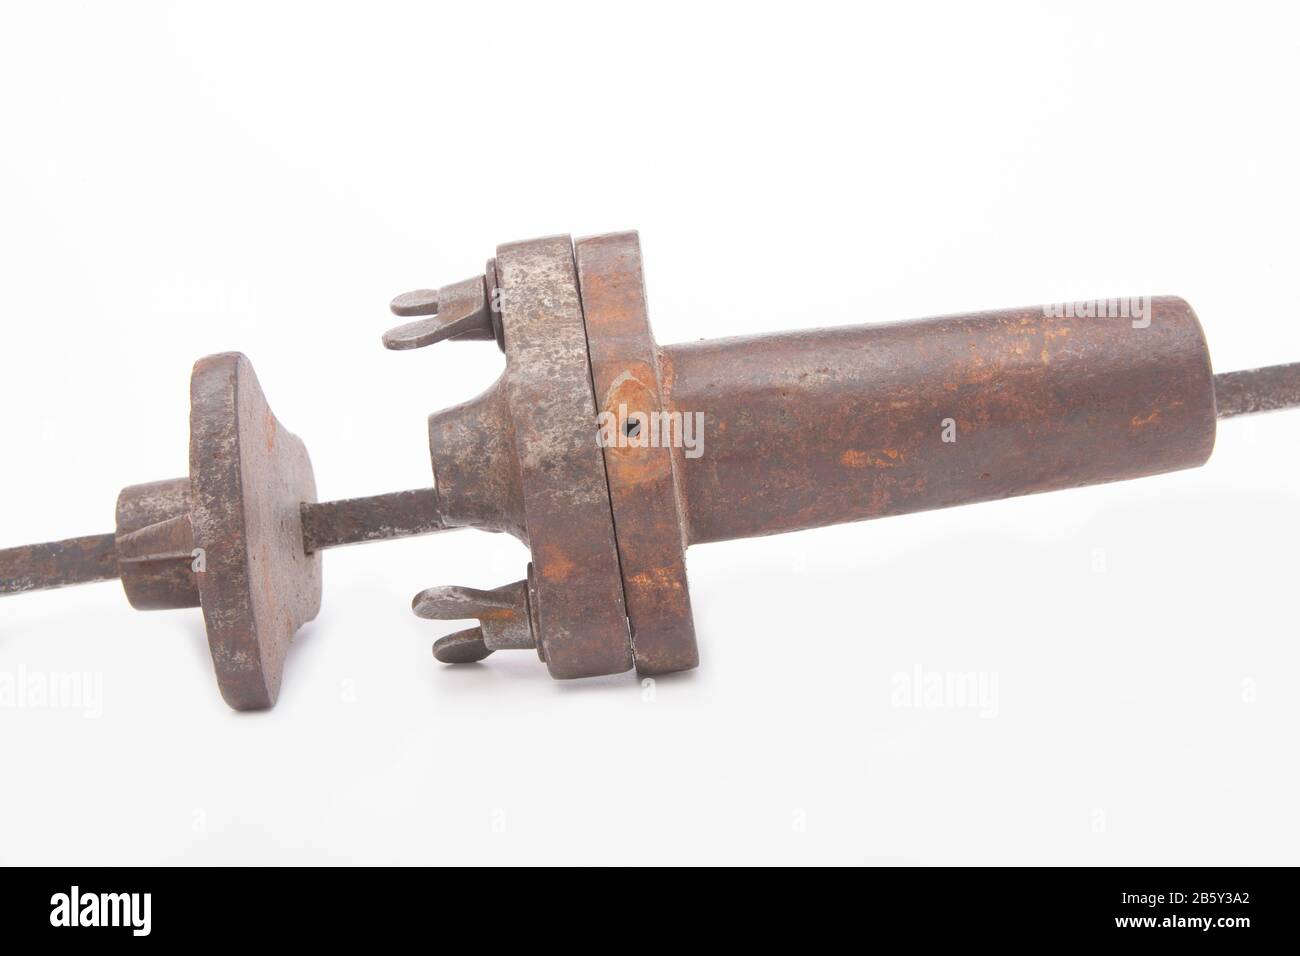 An old, metal alarm gun used for deterring poachers. The gun could be loaded with a shotgun cartridge and was fired by a trip wire. The loud bang woul Stock Photo